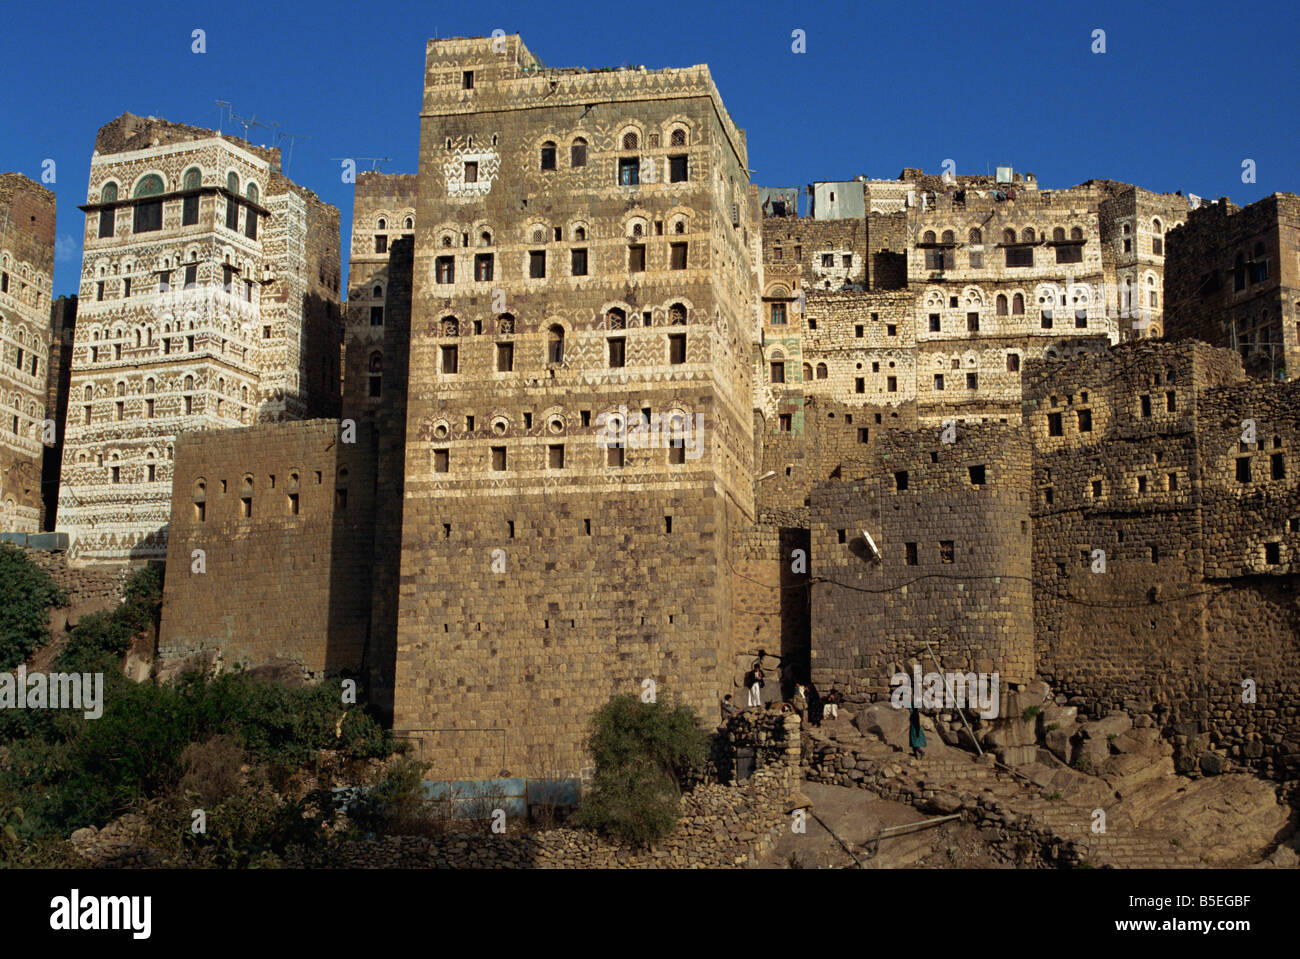 Fortress houses typical architecture of the area Mahwit Sana region north Yemen Middle East D Traverso Stock Photo